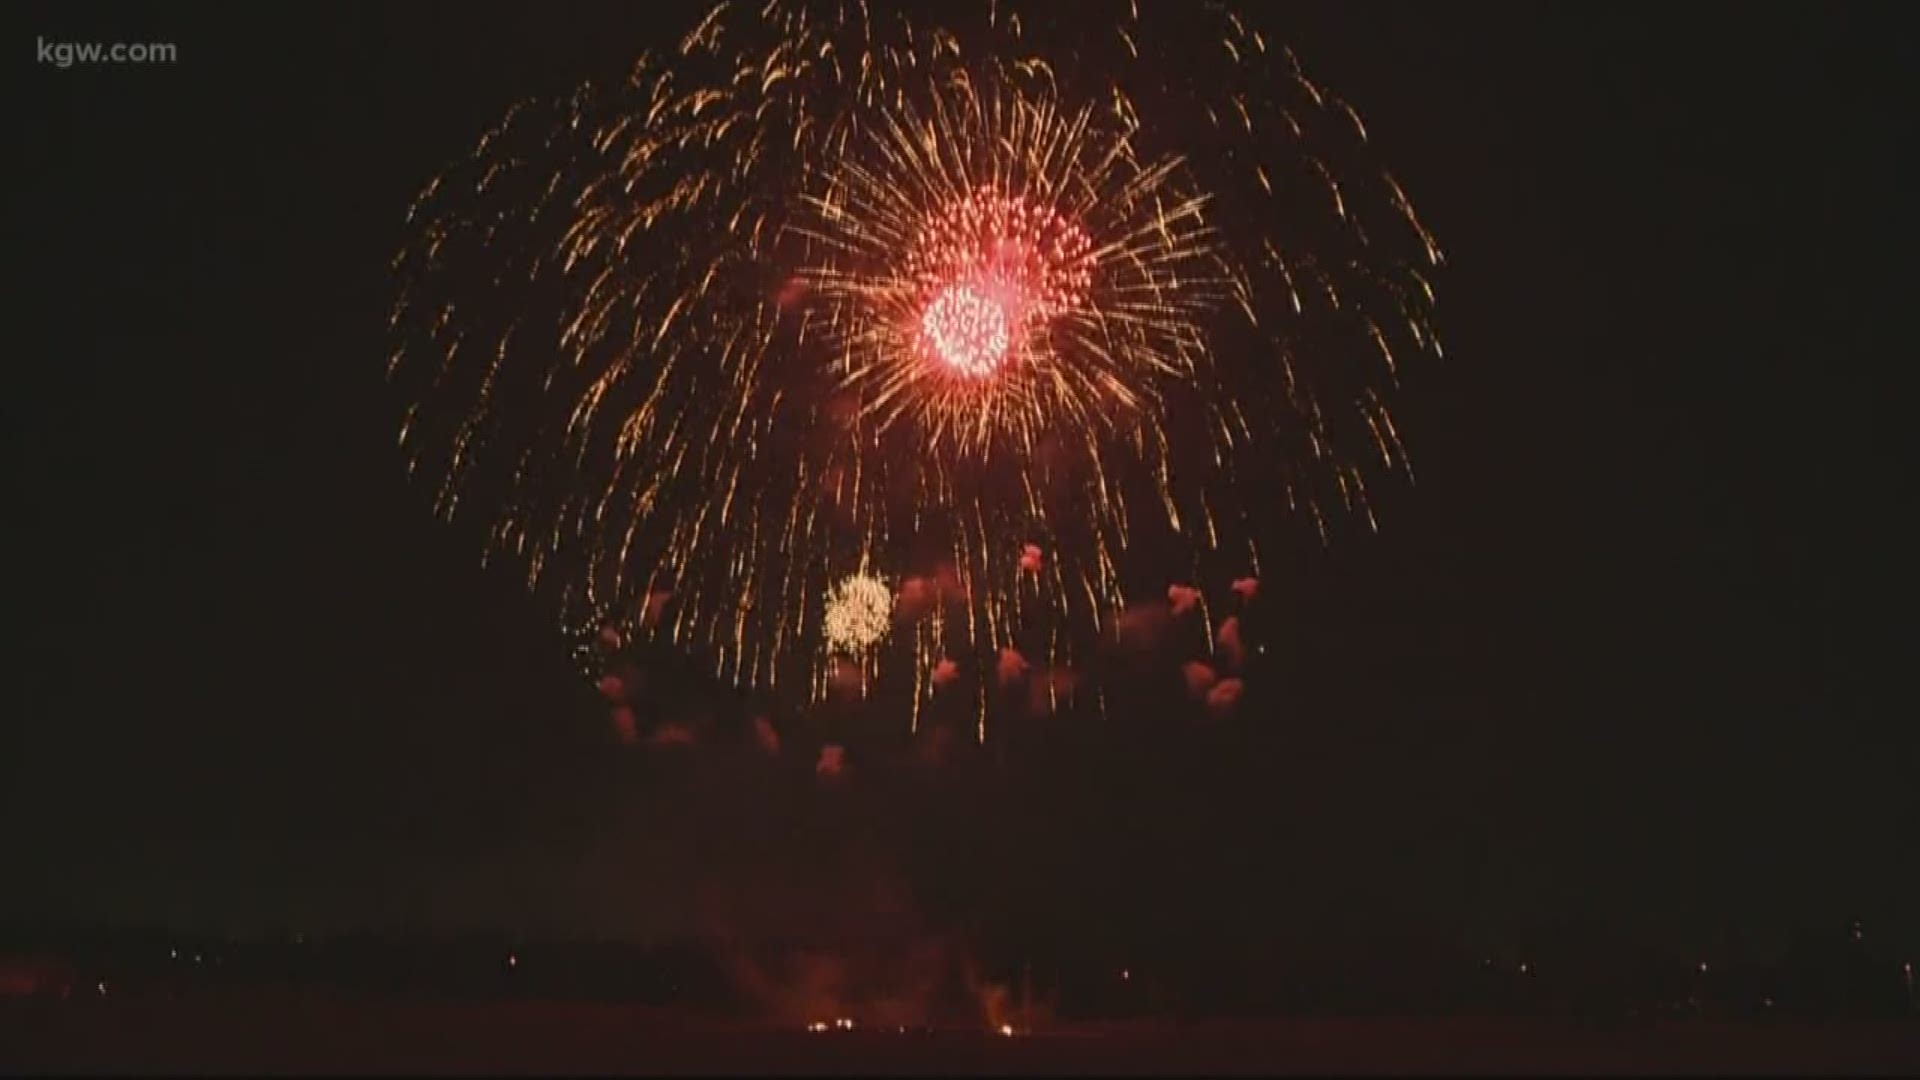 Thousands were awed by the annual Fourth of July fireworks show at Fort Vancouver.